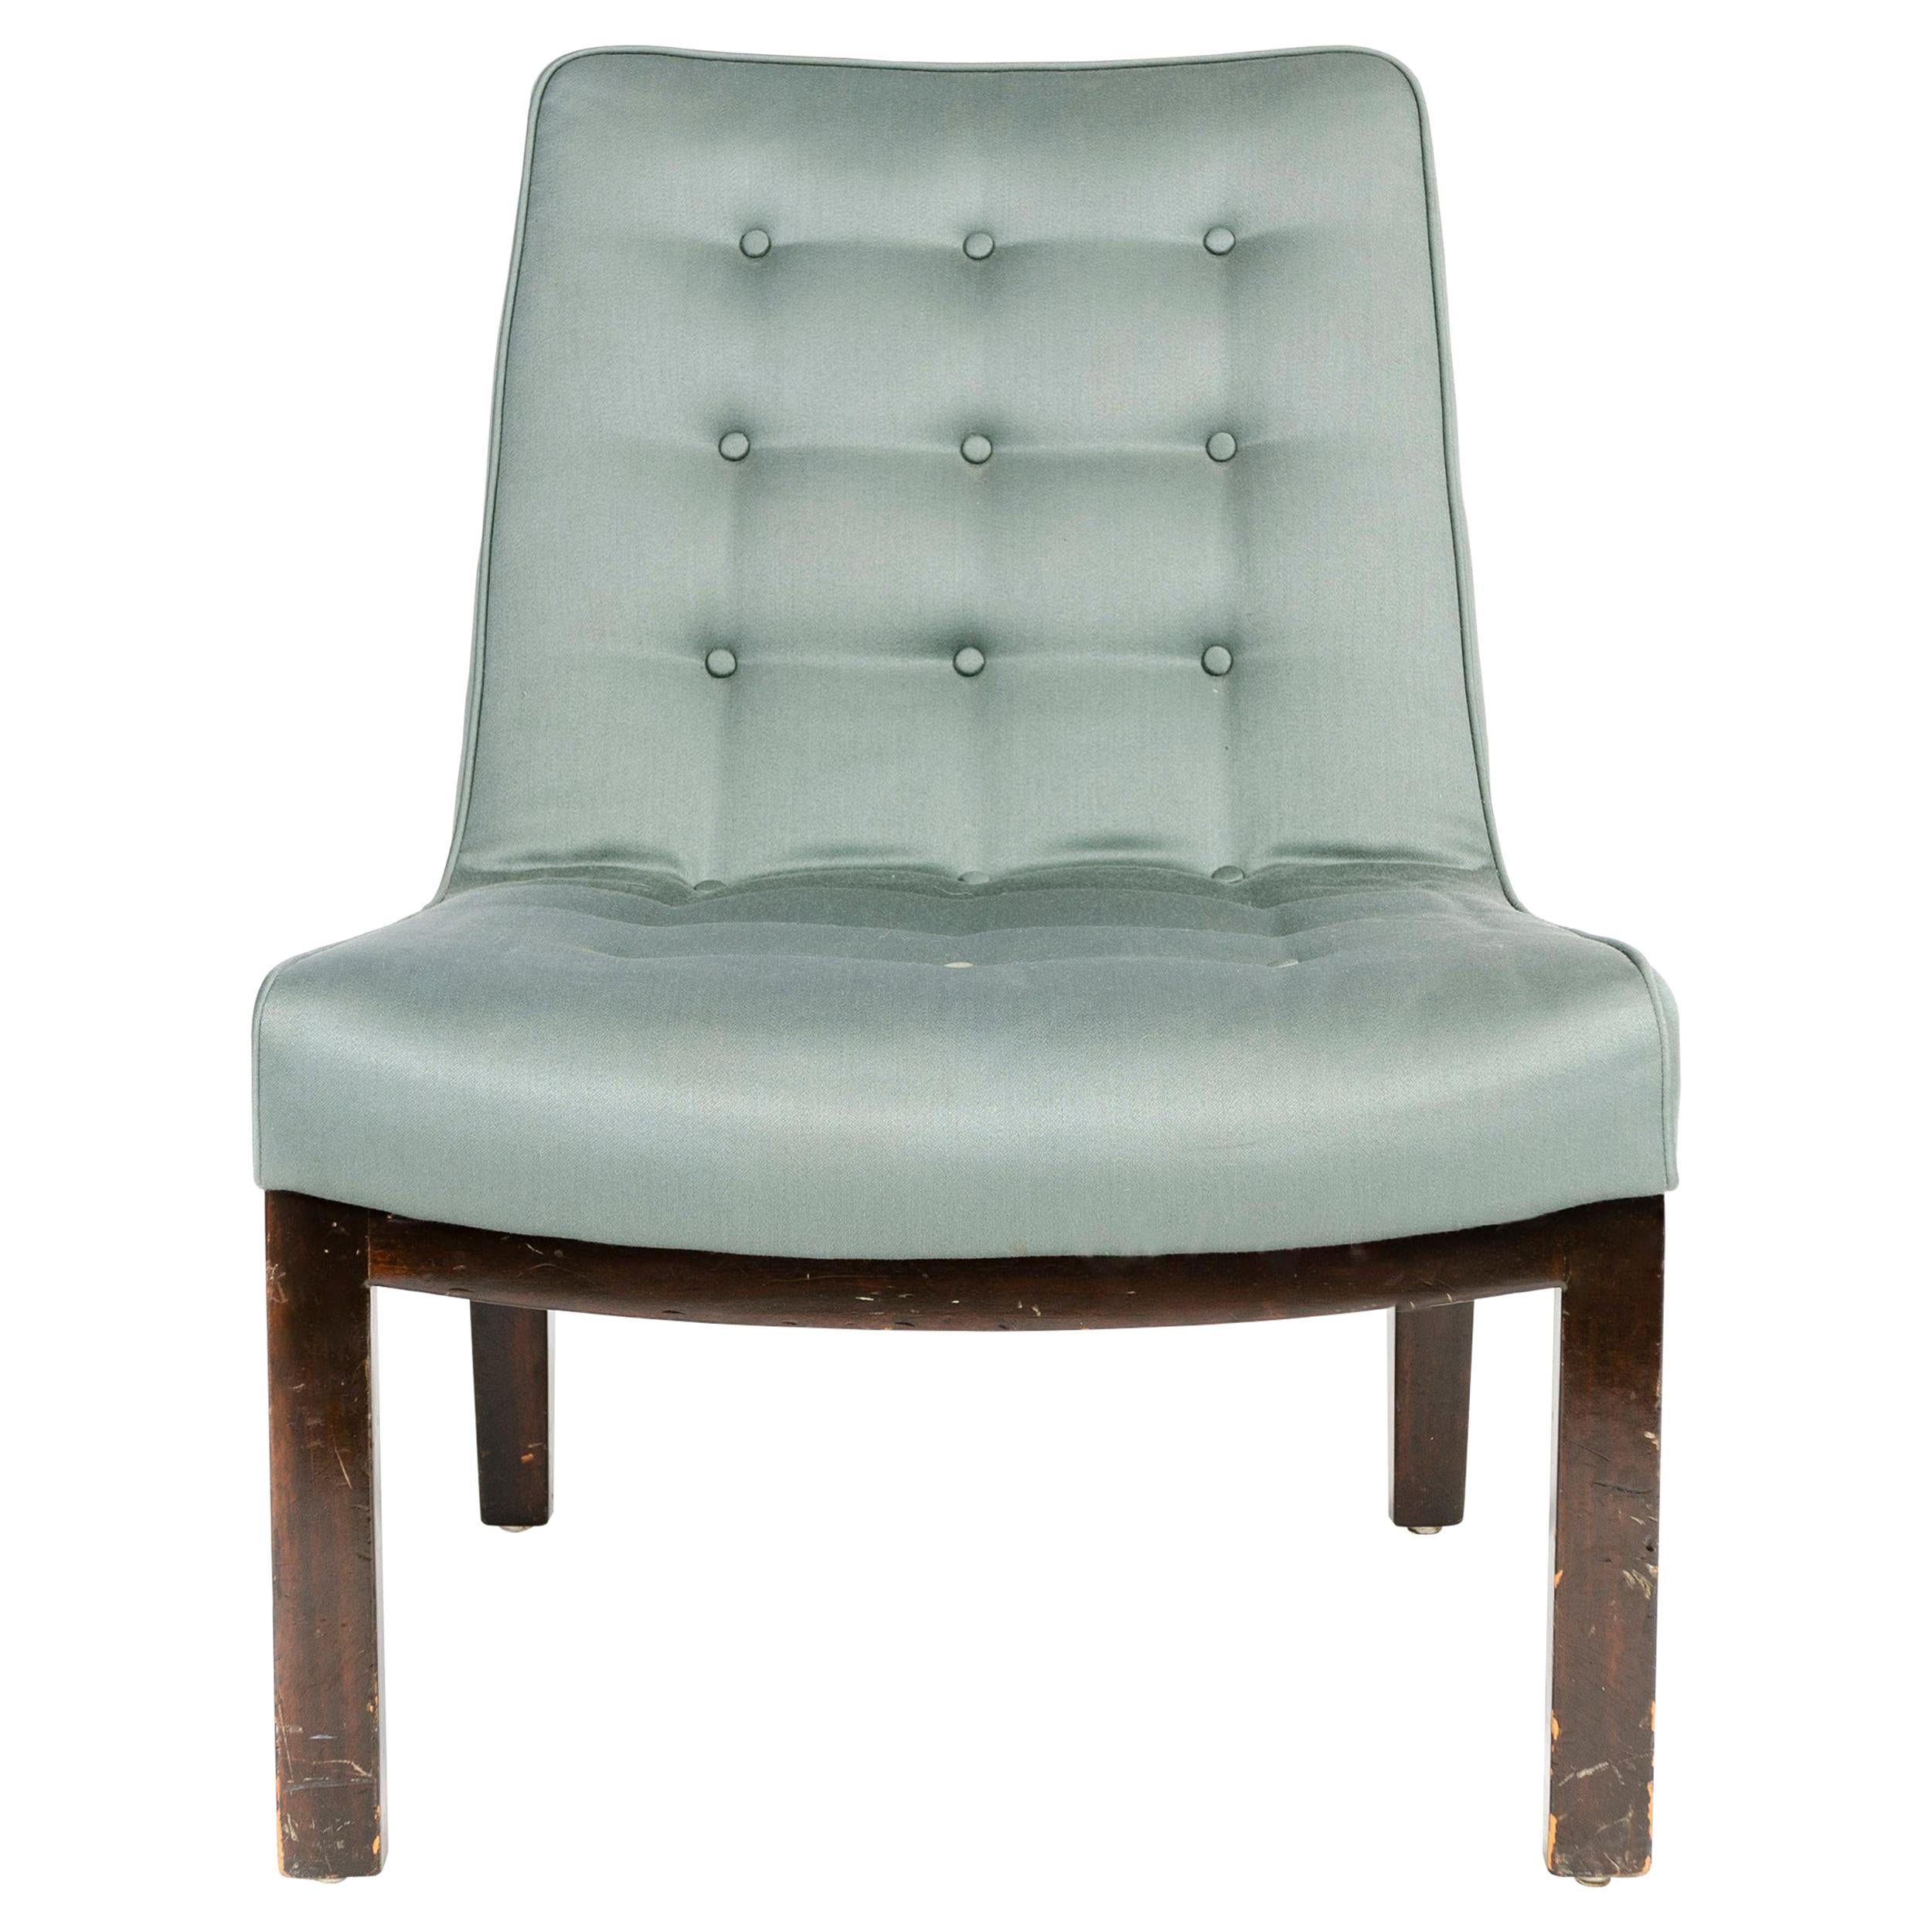 1950s Tufted Lounge Chair by Edward Wormley for Dunbar